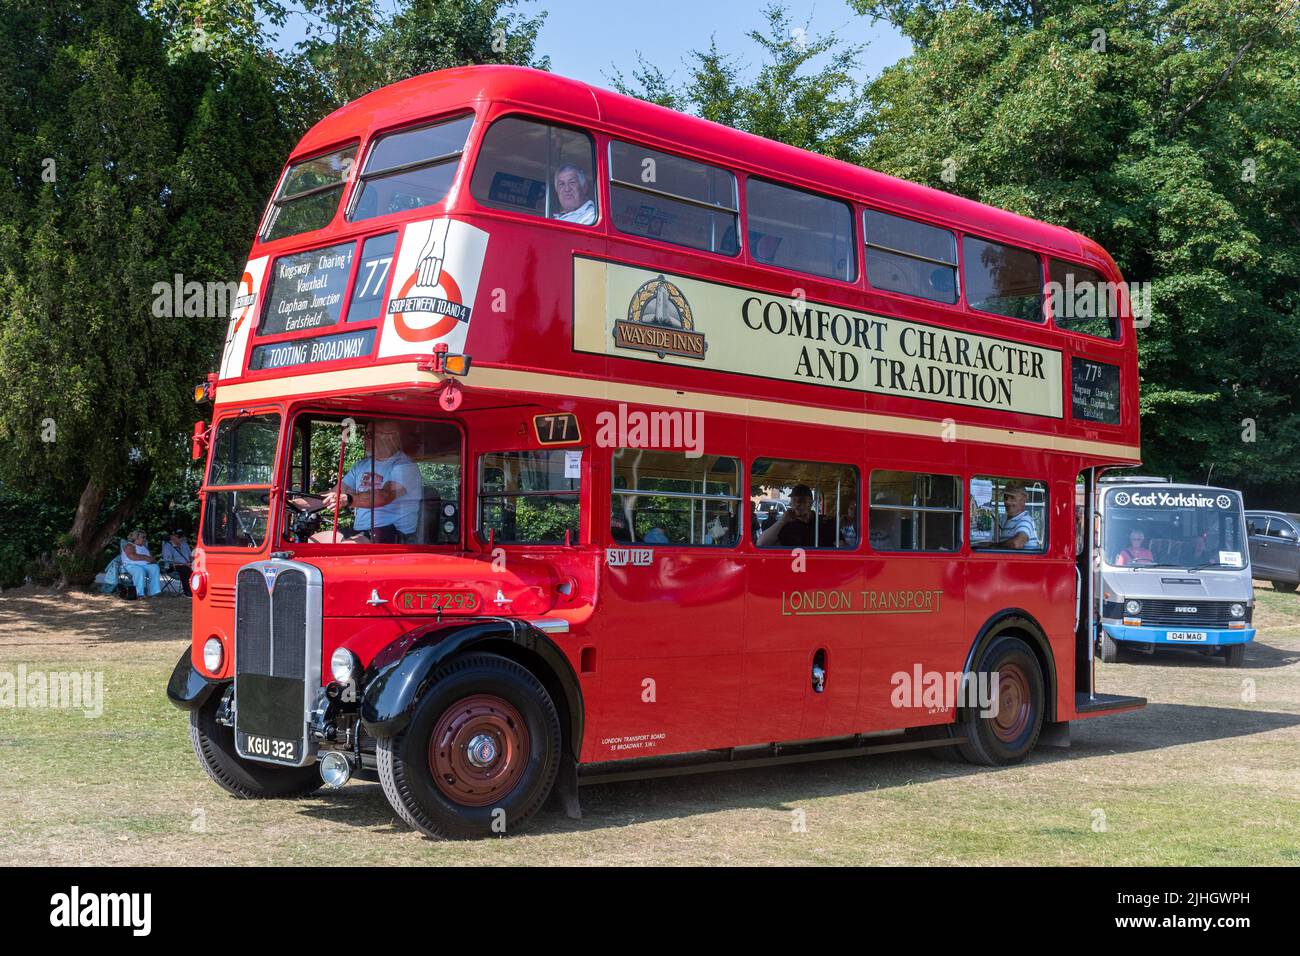 Vintage red London Transport double-decker bus at a transport show in Hampshire, England, UK Stock Photo